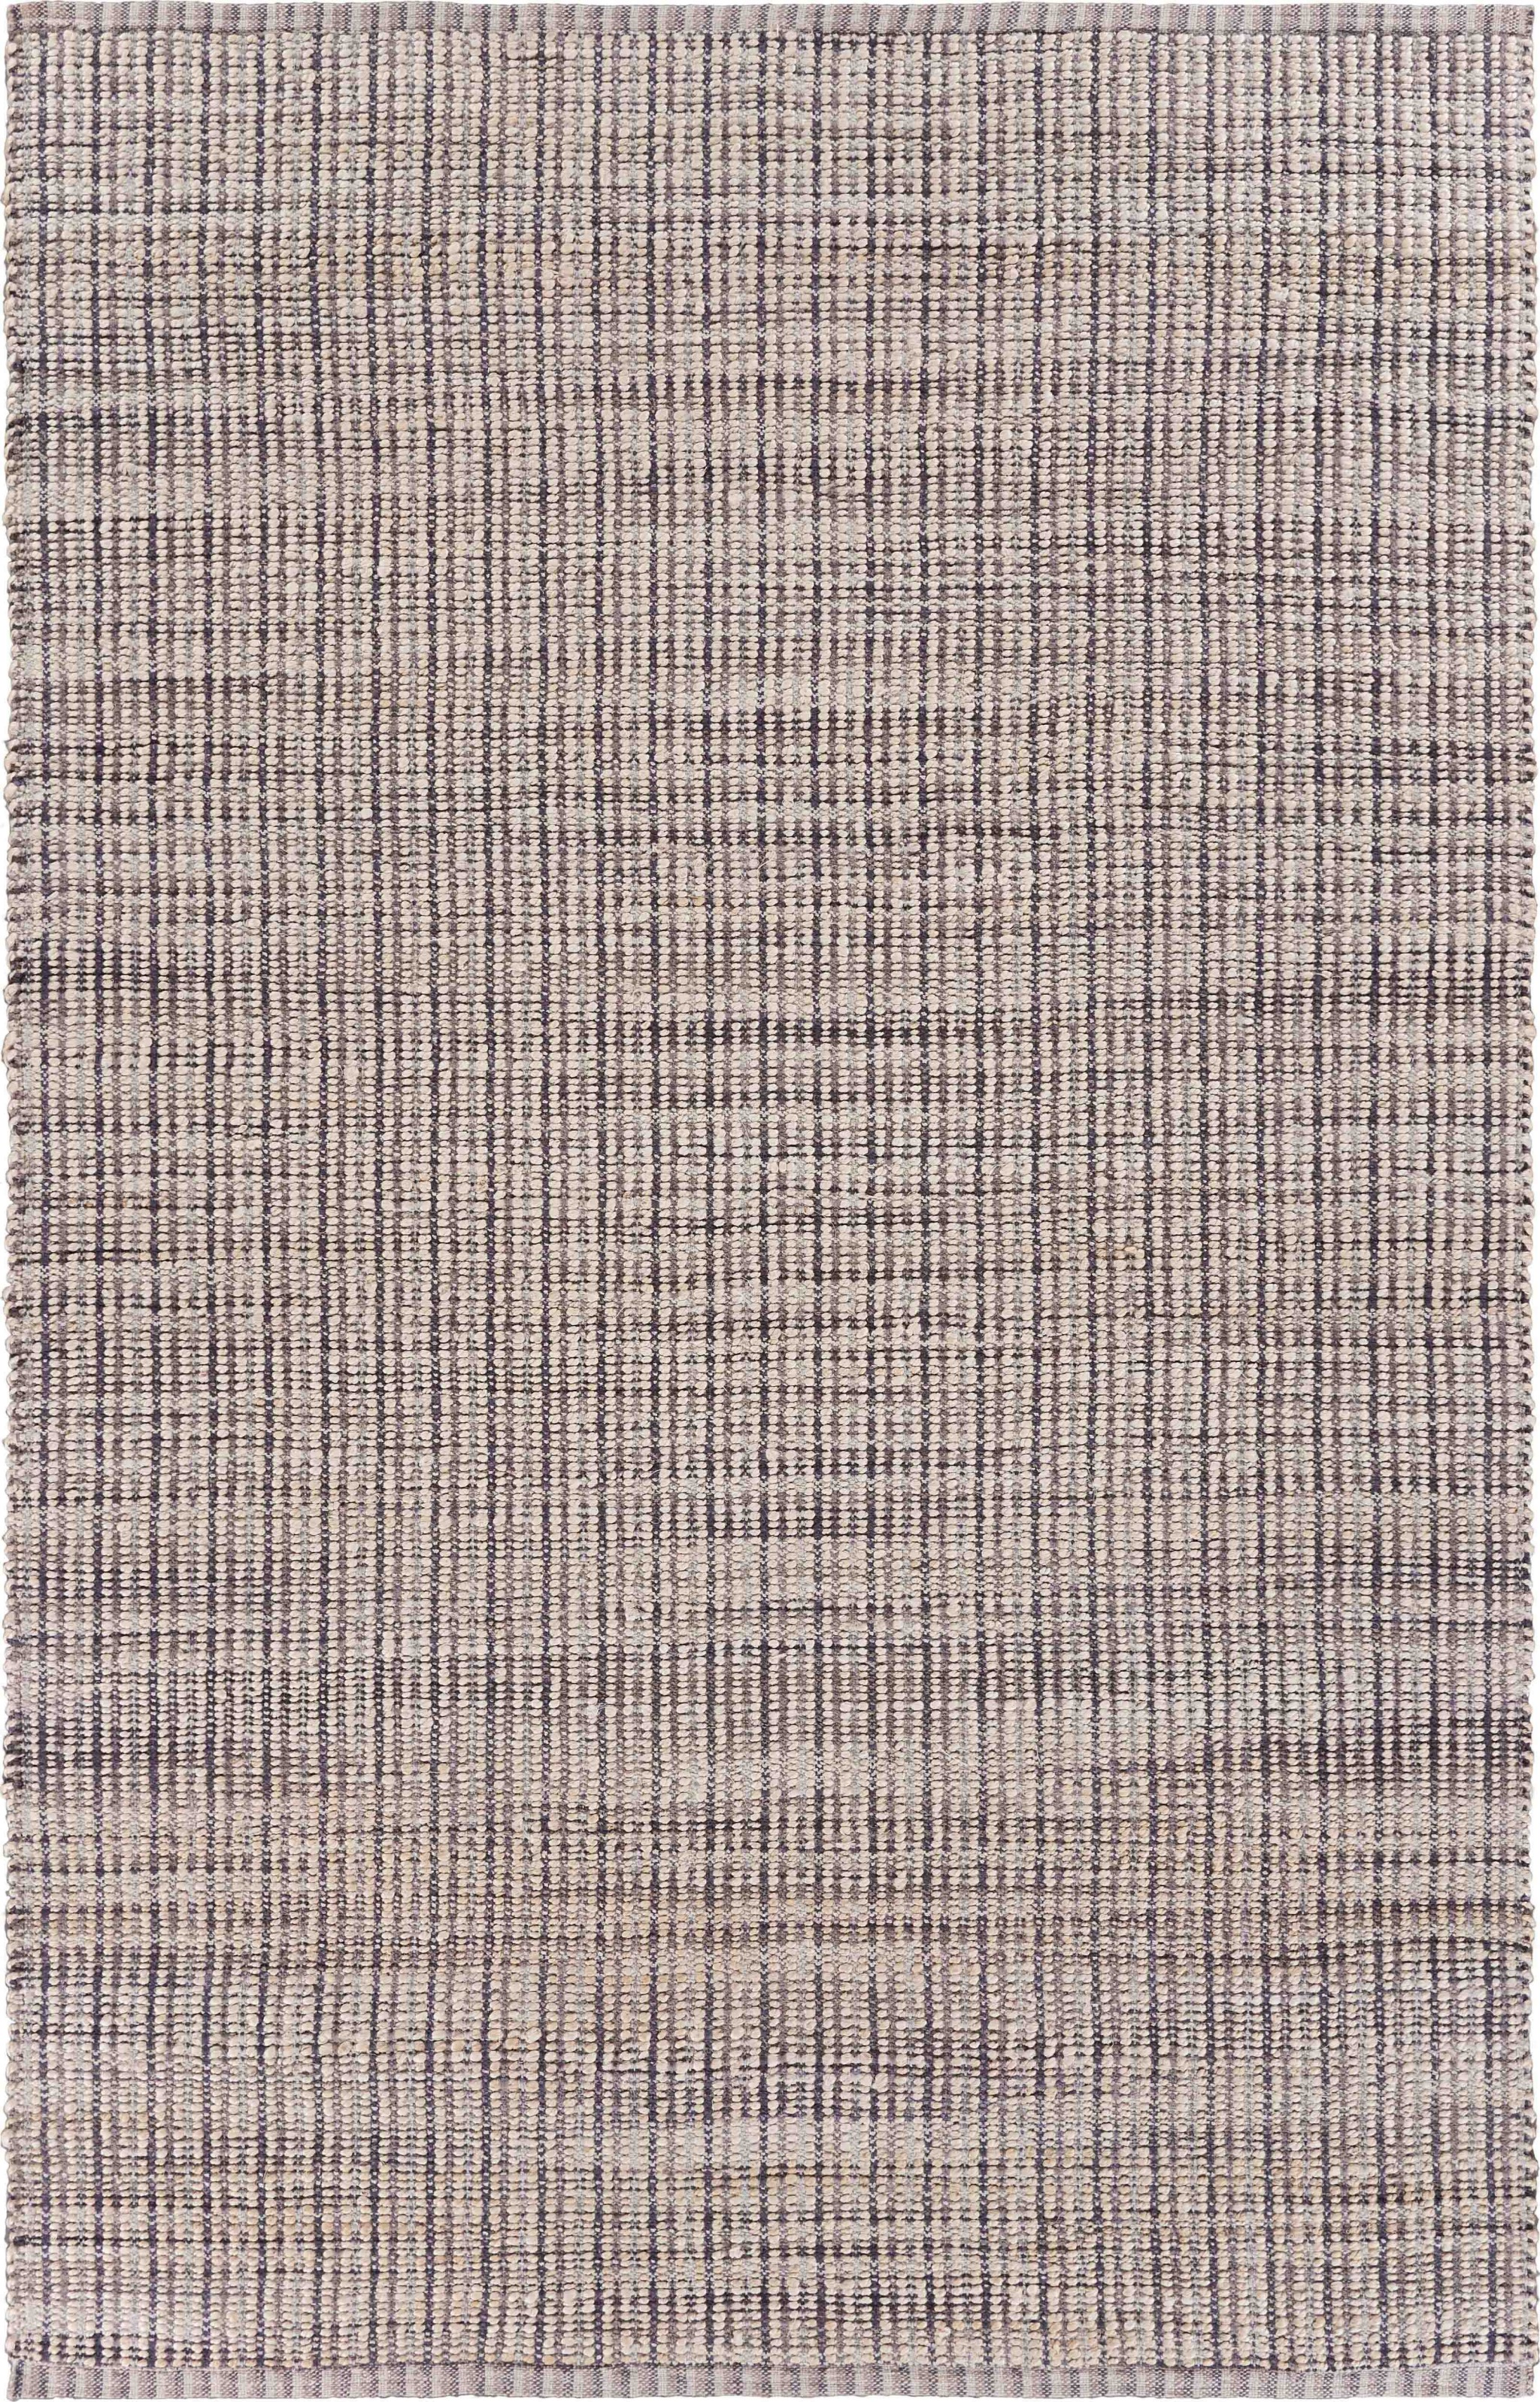 9’ x 12’ Brown and Beige Toned Jute Area Rug-395496-1